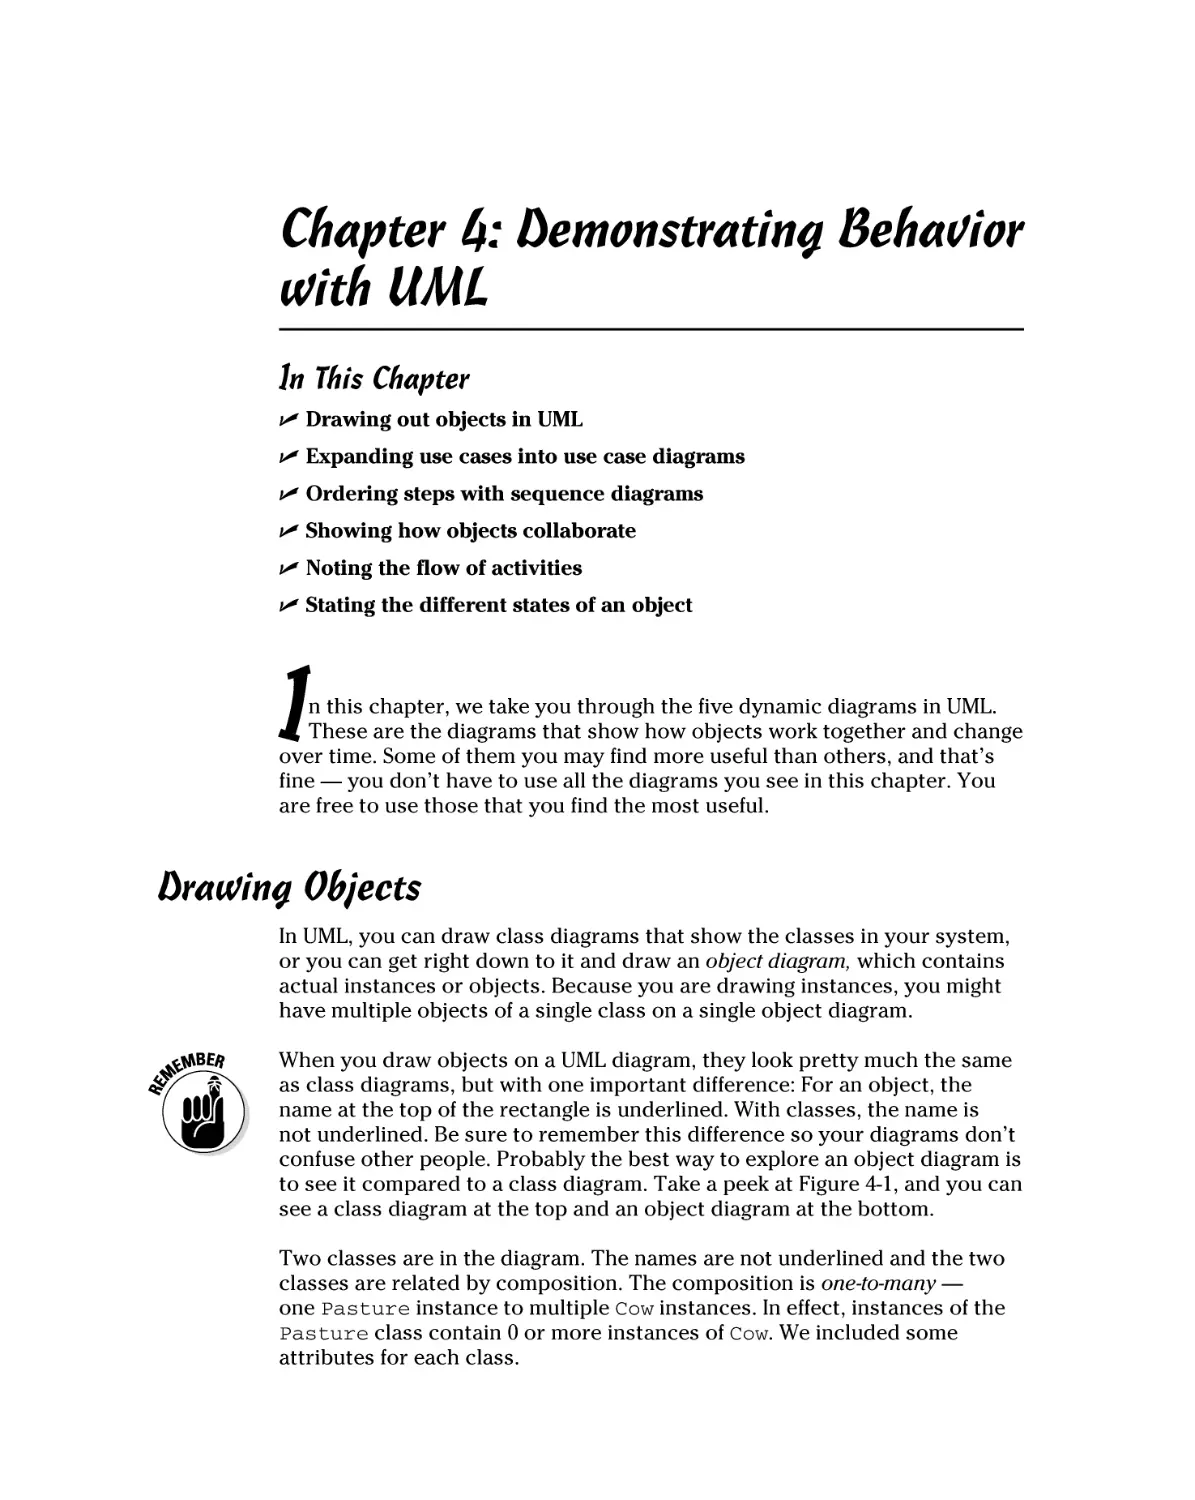 Chapter 4
Drawing Objects